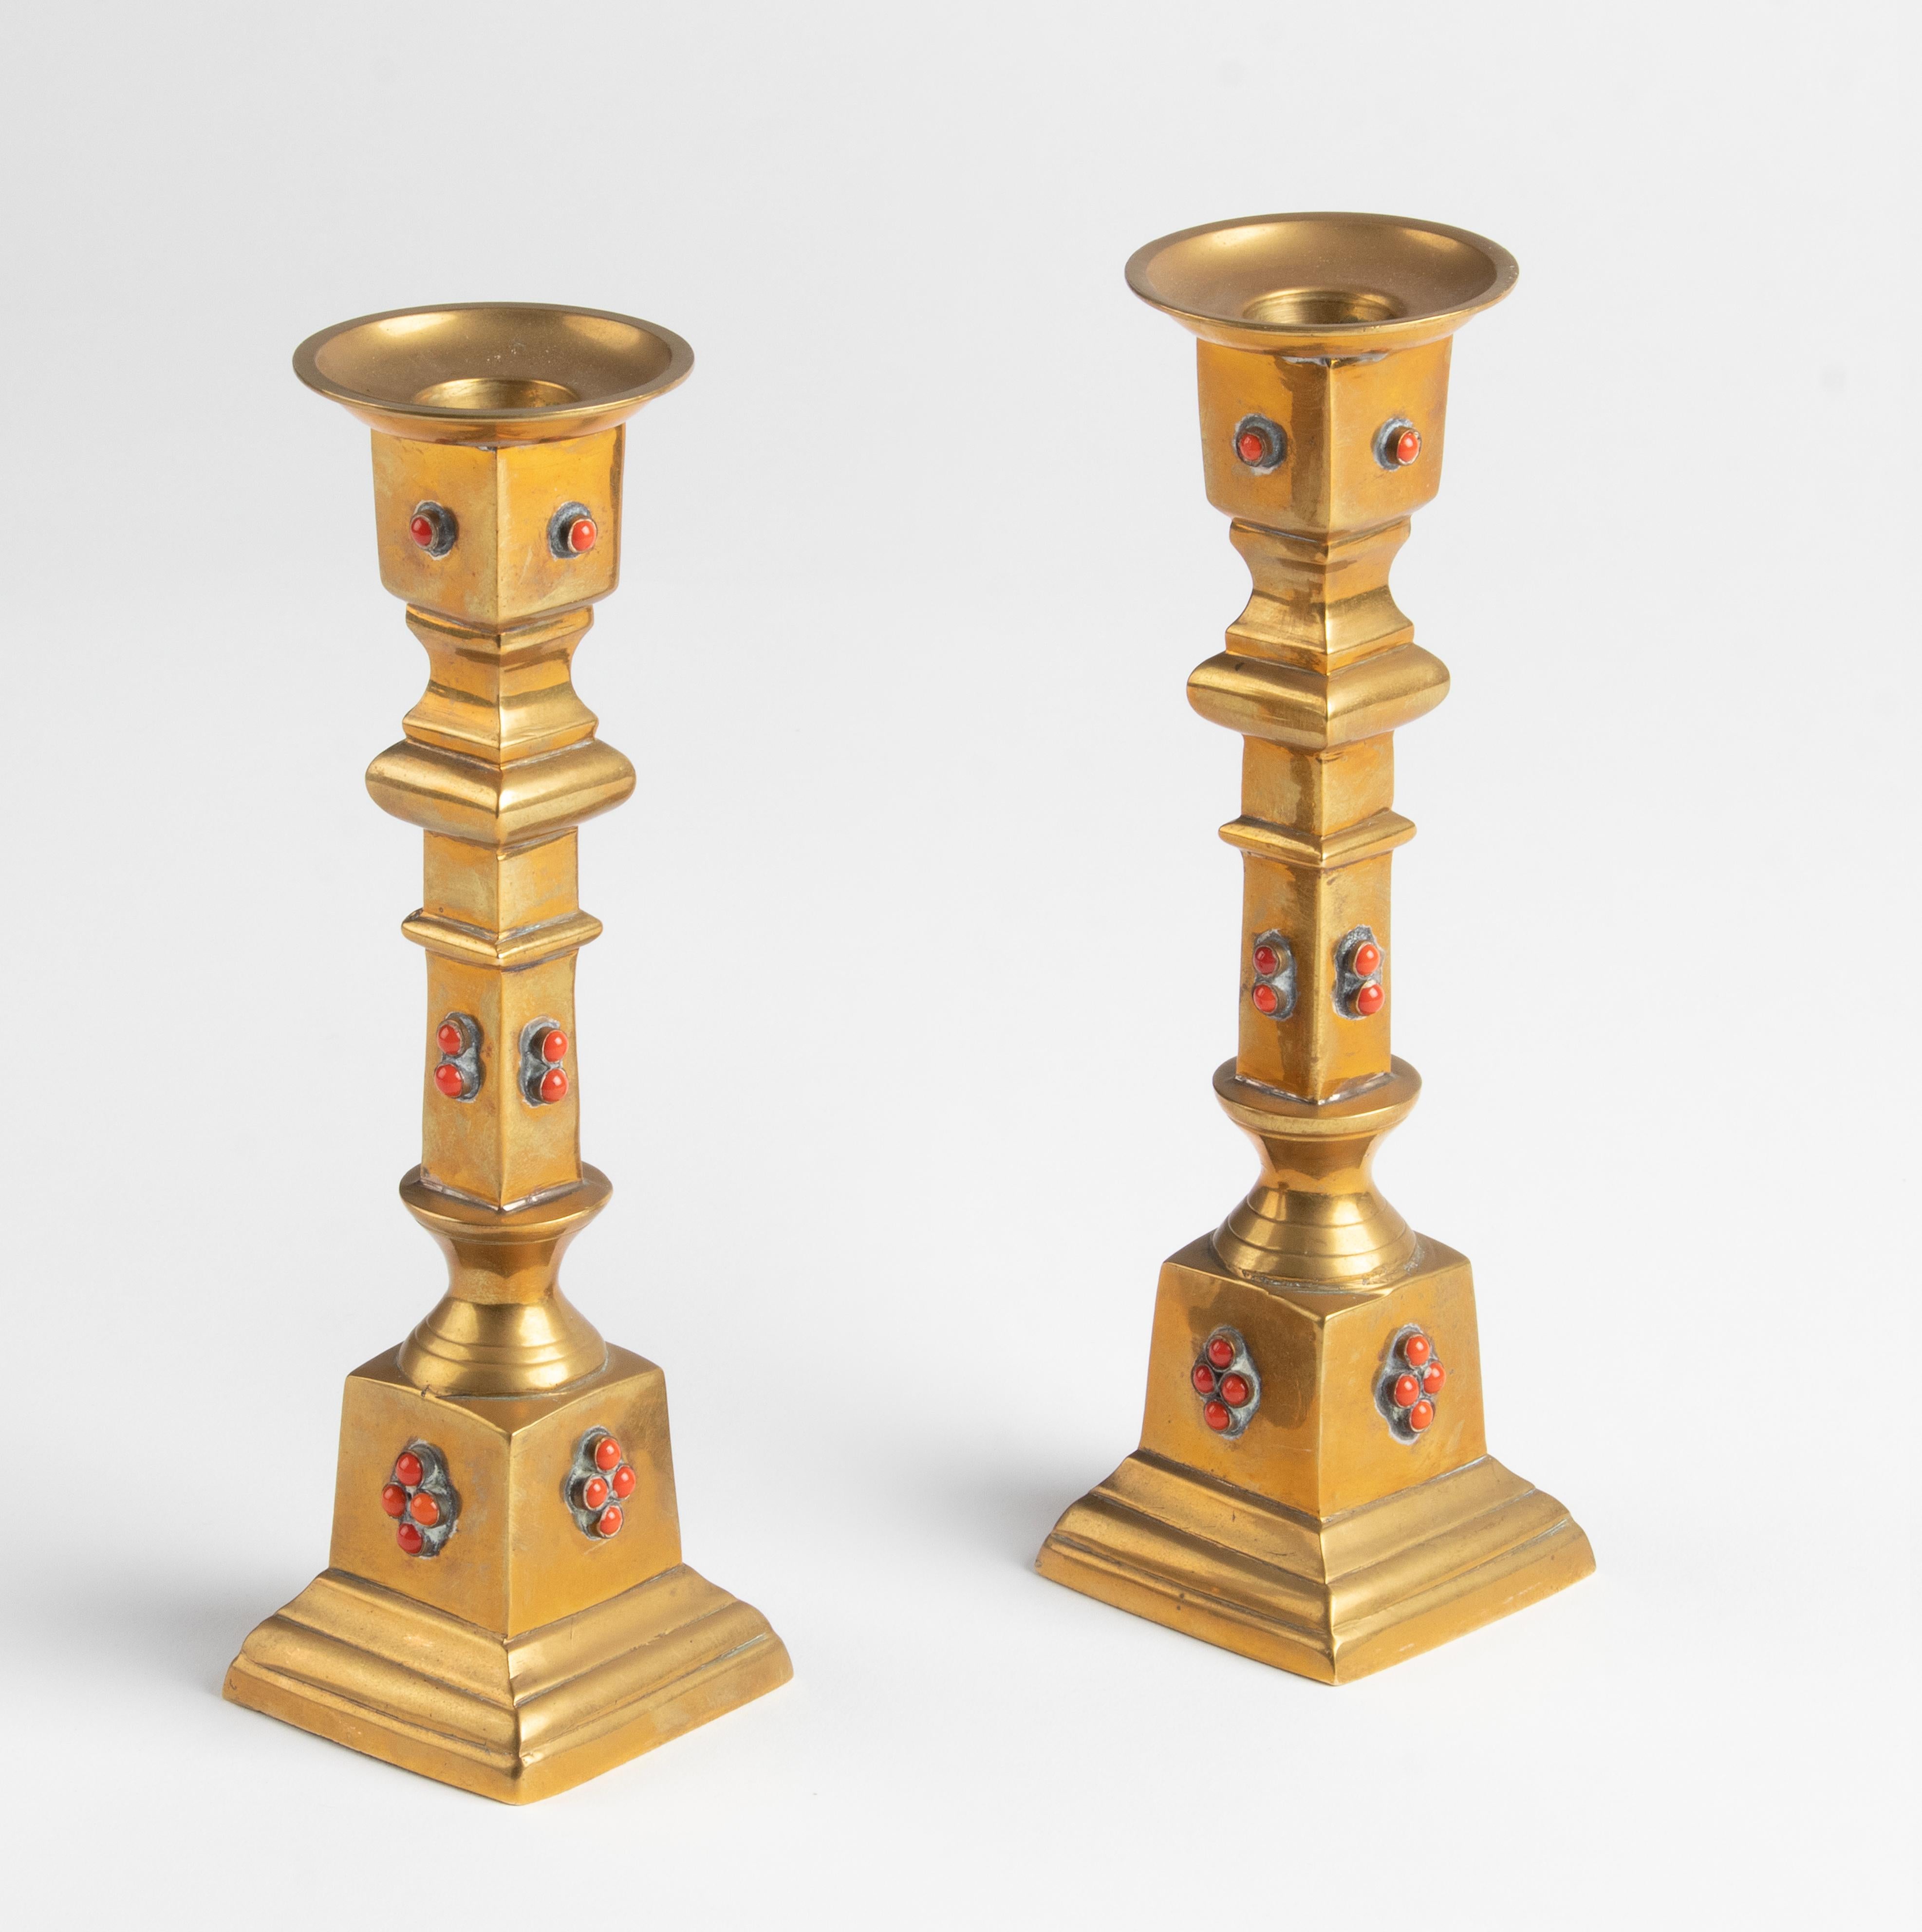 A beautiful pair of antique copper candlesticks. Beautifully decorated with inlaid stones, coral colored.
The candlesticks are not too big and that is what makes them so attractive. They are in good condition.